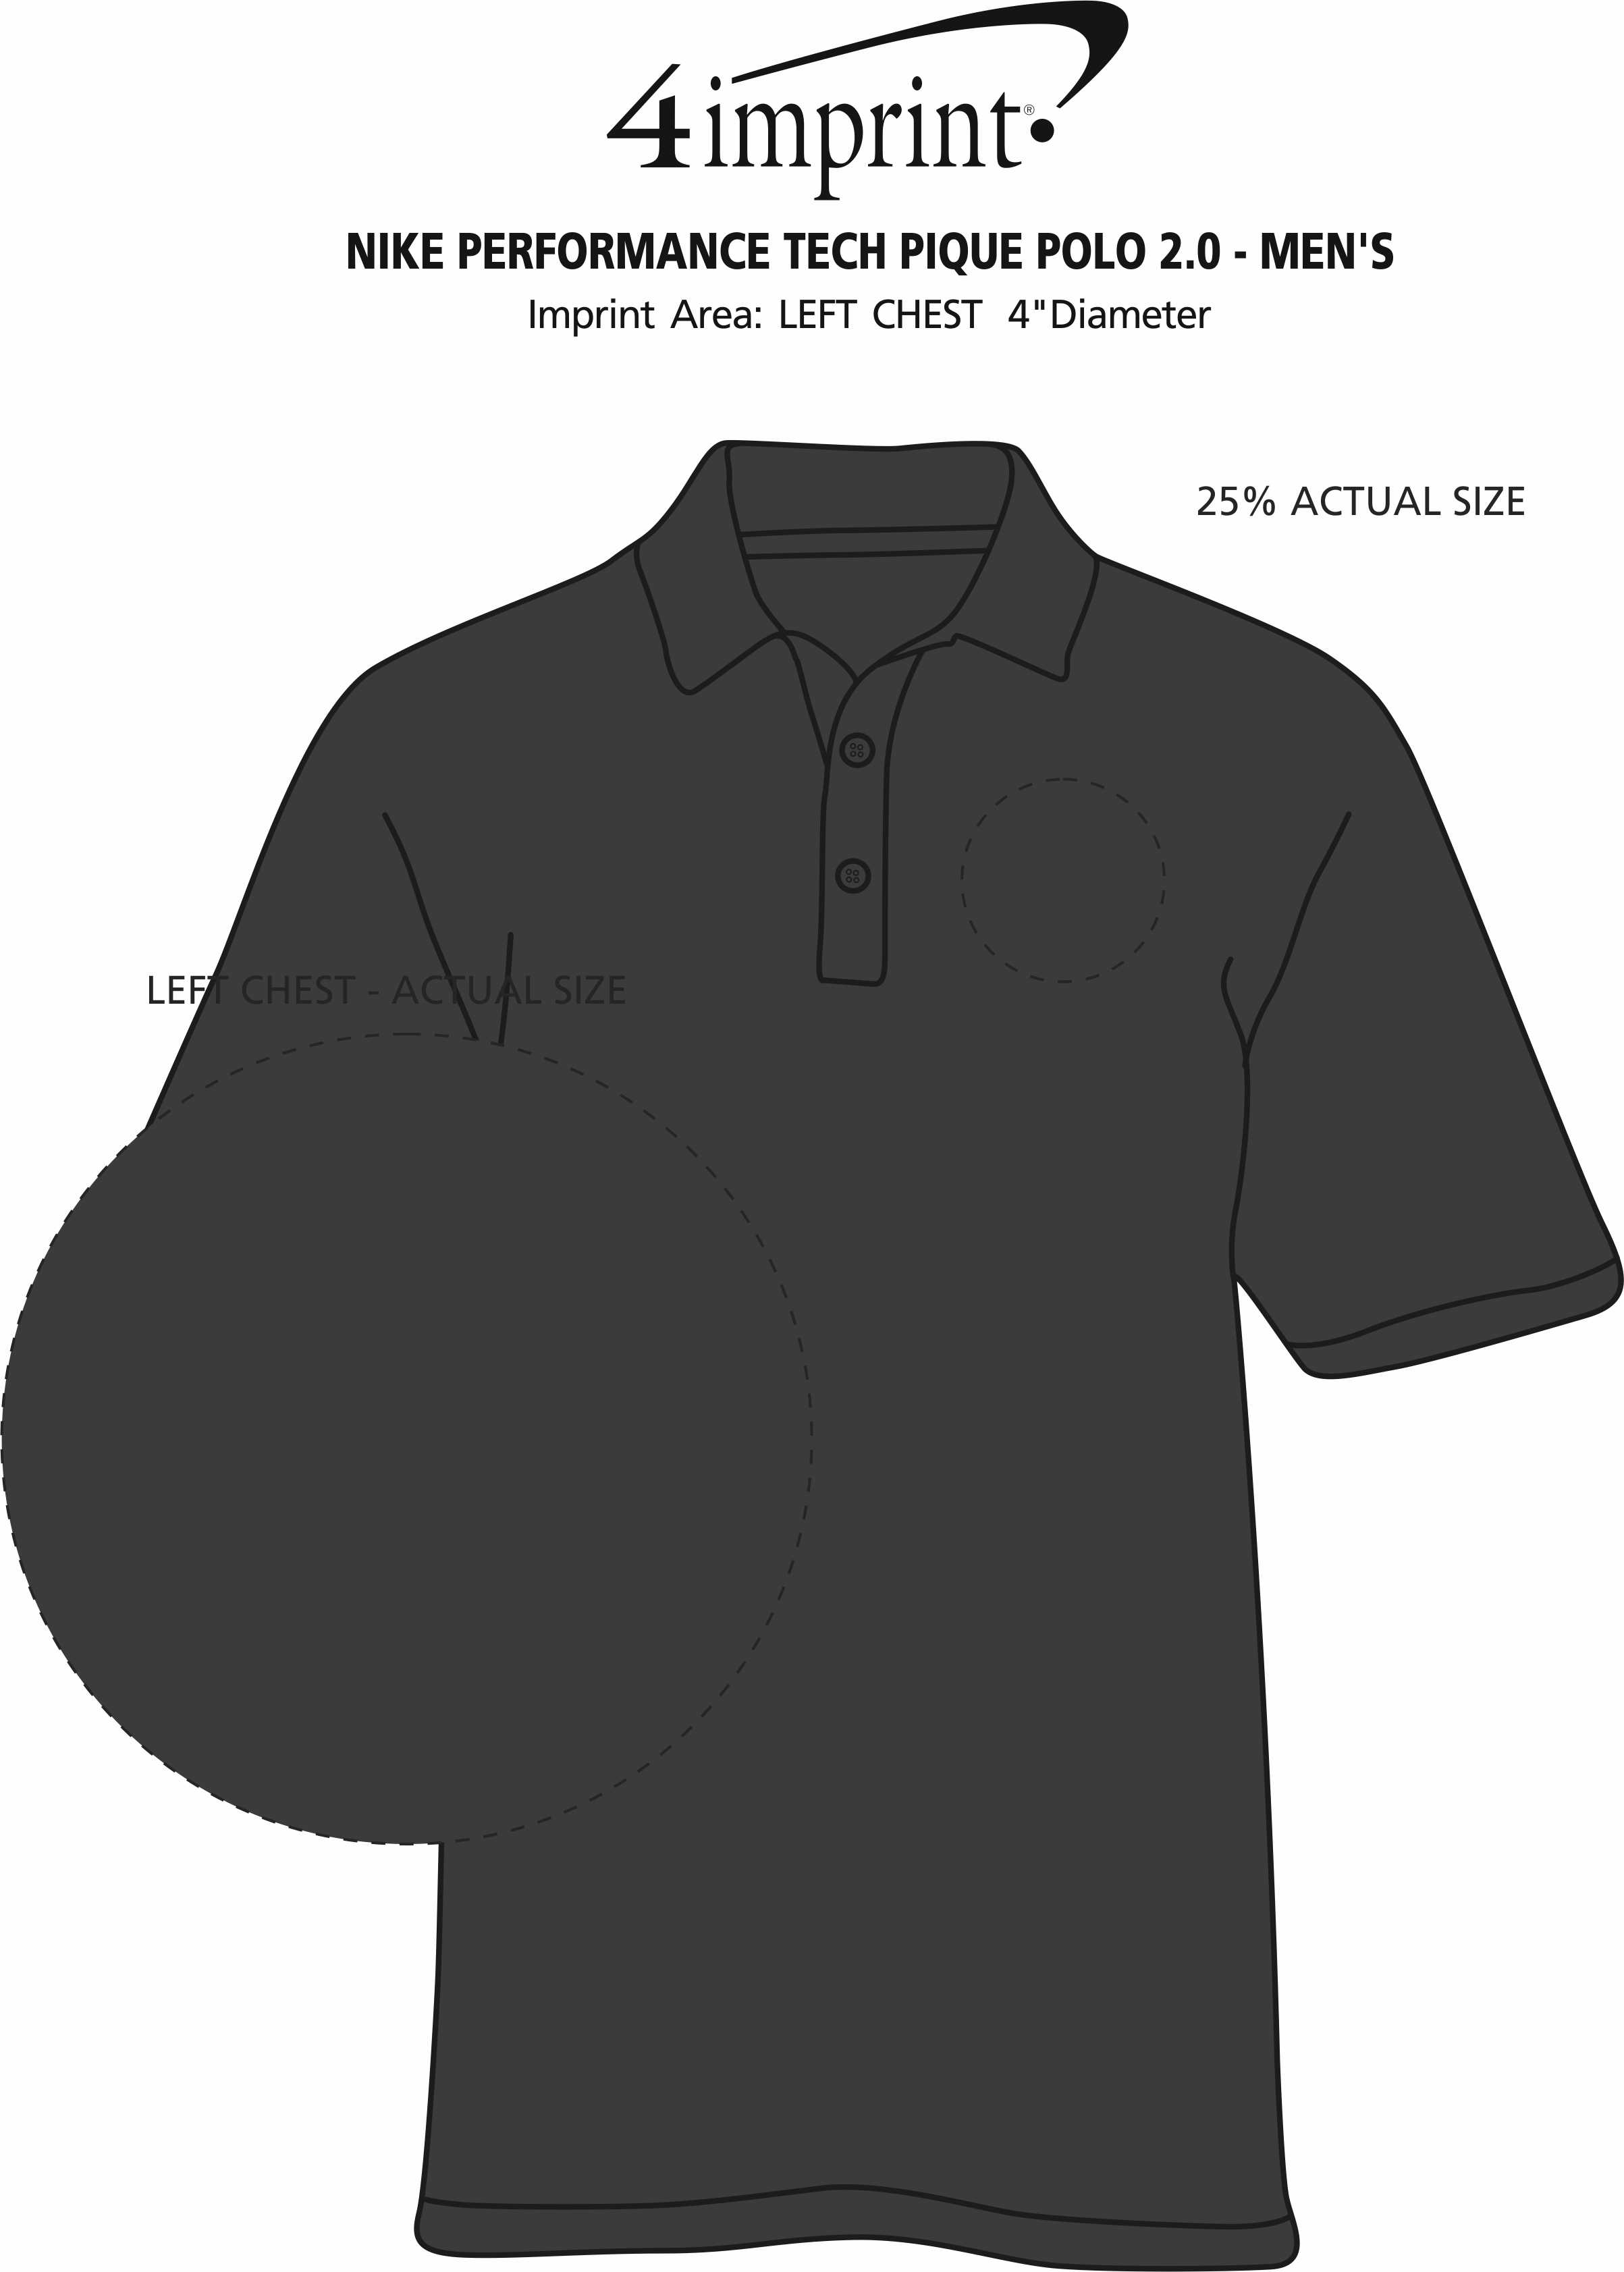 Imprint Area of Nike Performance Tech Pique Polo 2.0 - Men's - Embroidered